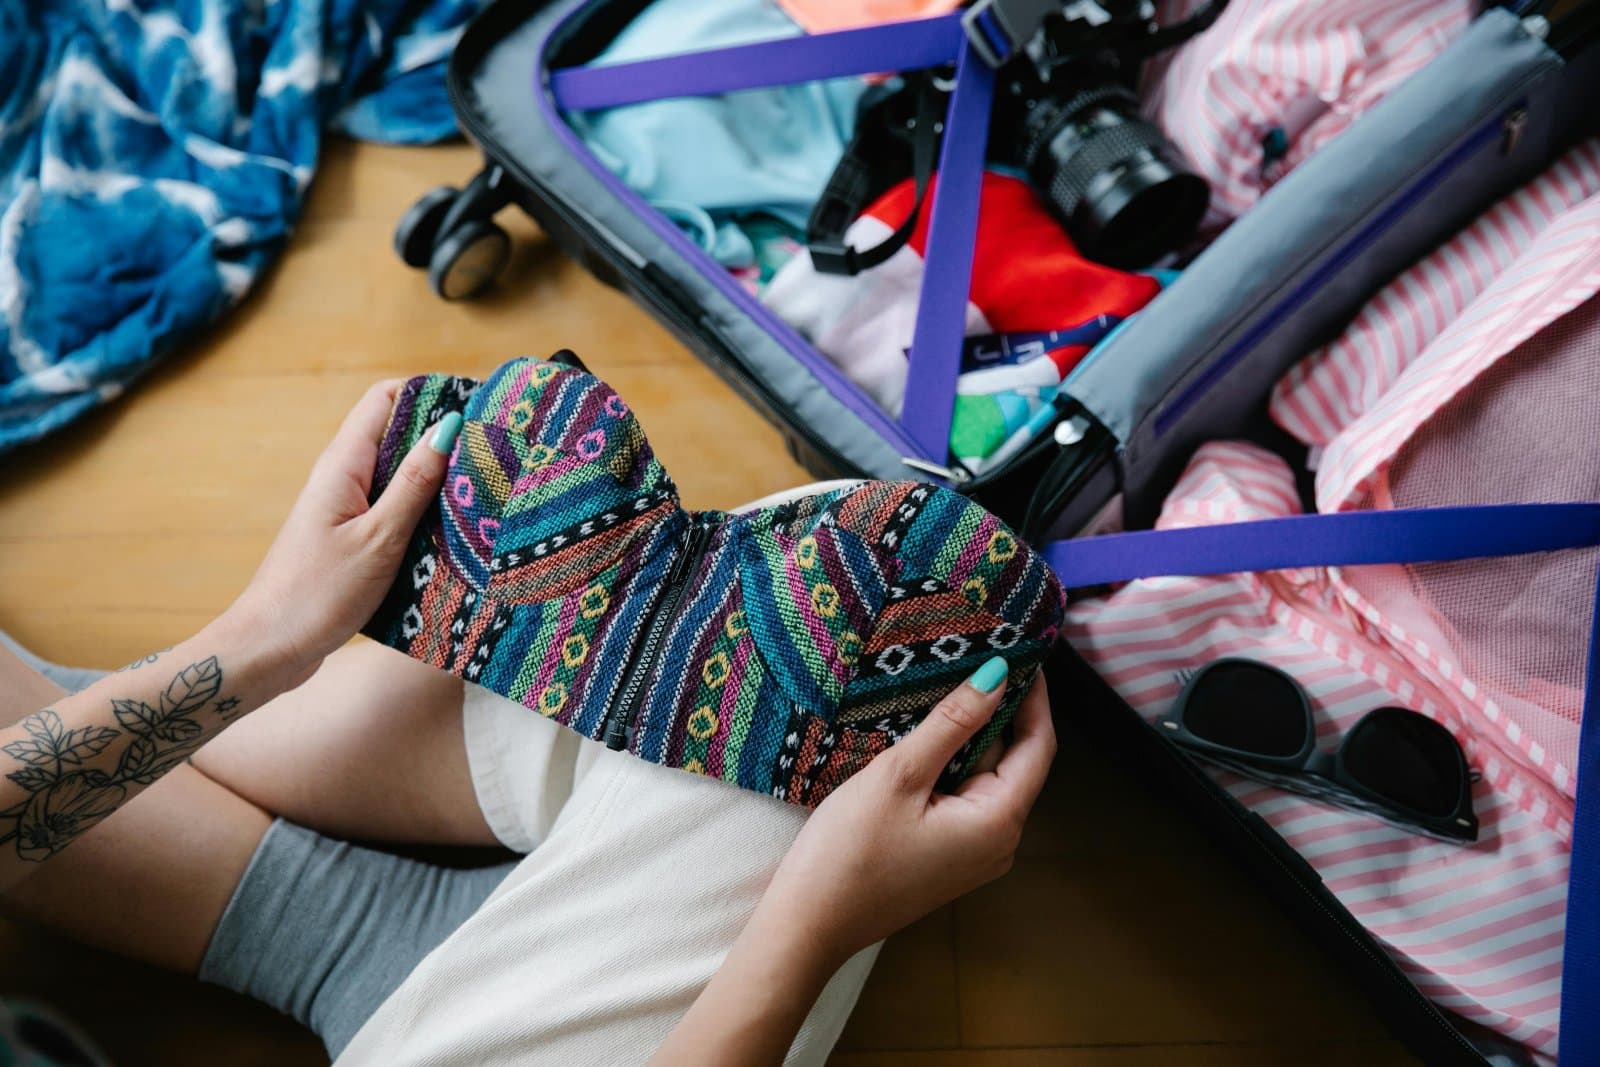 <p class="wp-caption-text">Image Credit: Pexels / Timur Weber</p>  <p>Maintain the shape of your bras by stuffing them with small, soft items and stacking them on top of each other.</p>